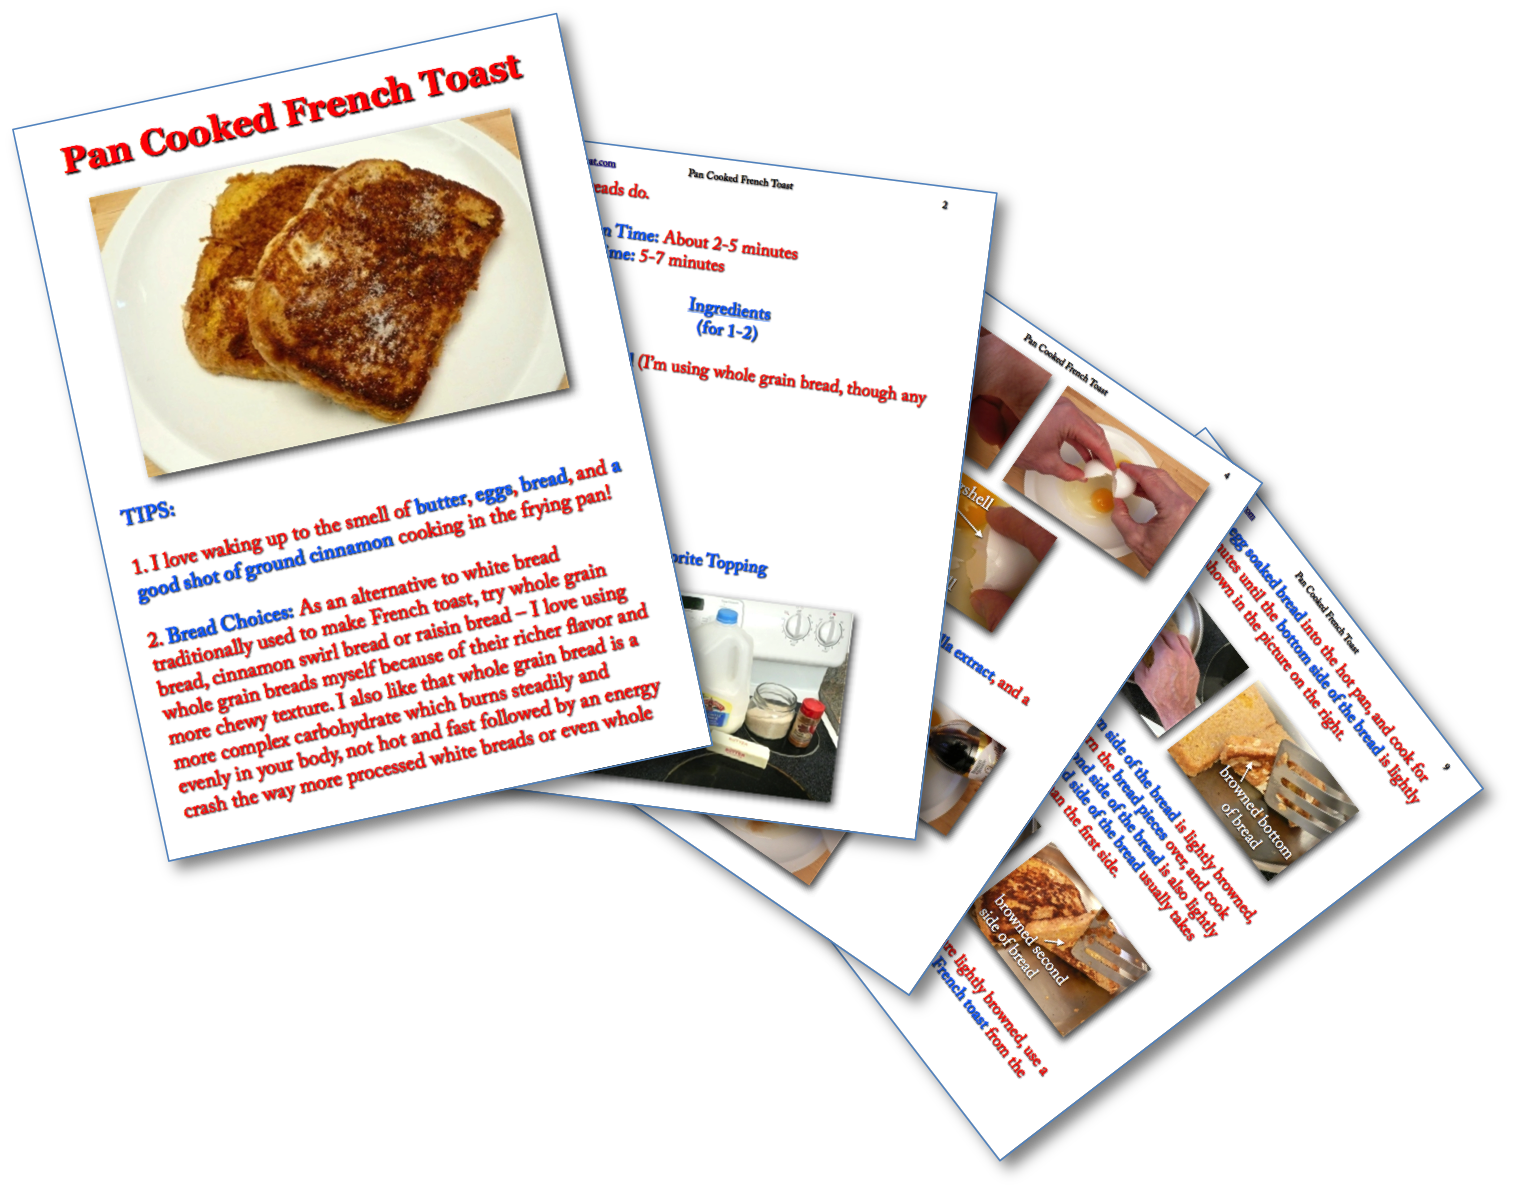 Pan Cooked French Toast Picture Book Recipe